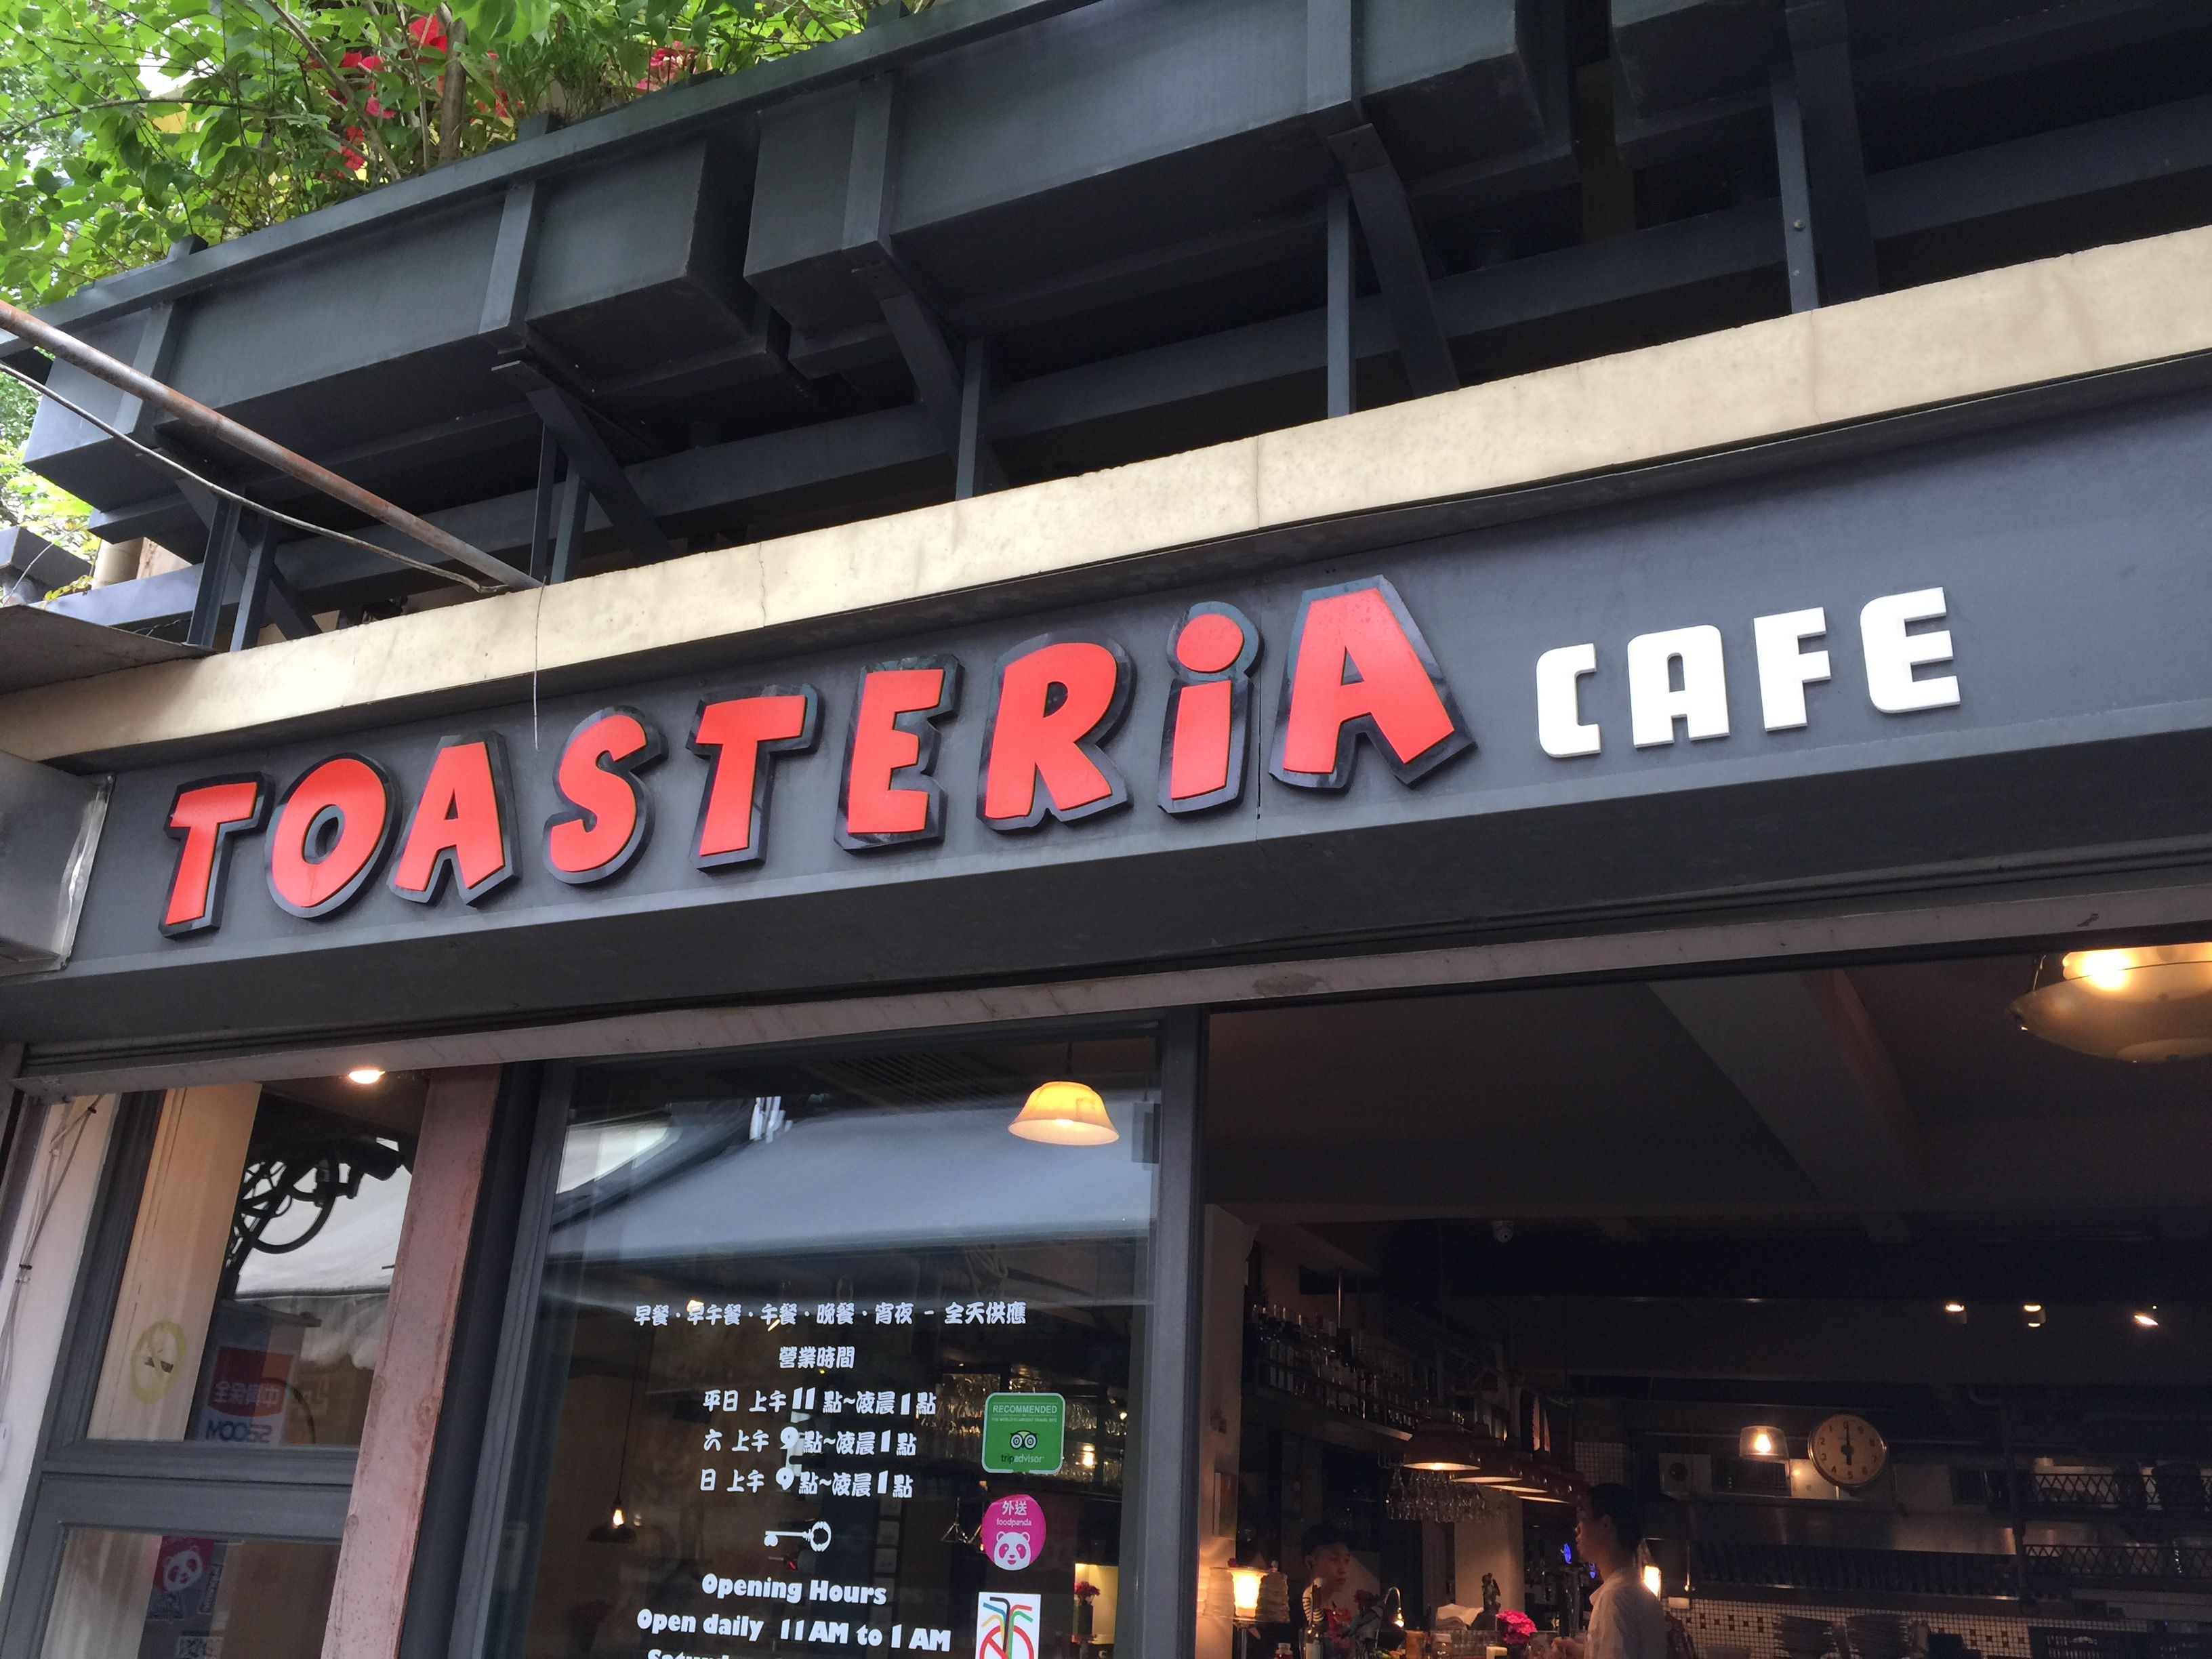 Worlds Best Grill Cheese at Toasteria Cafe